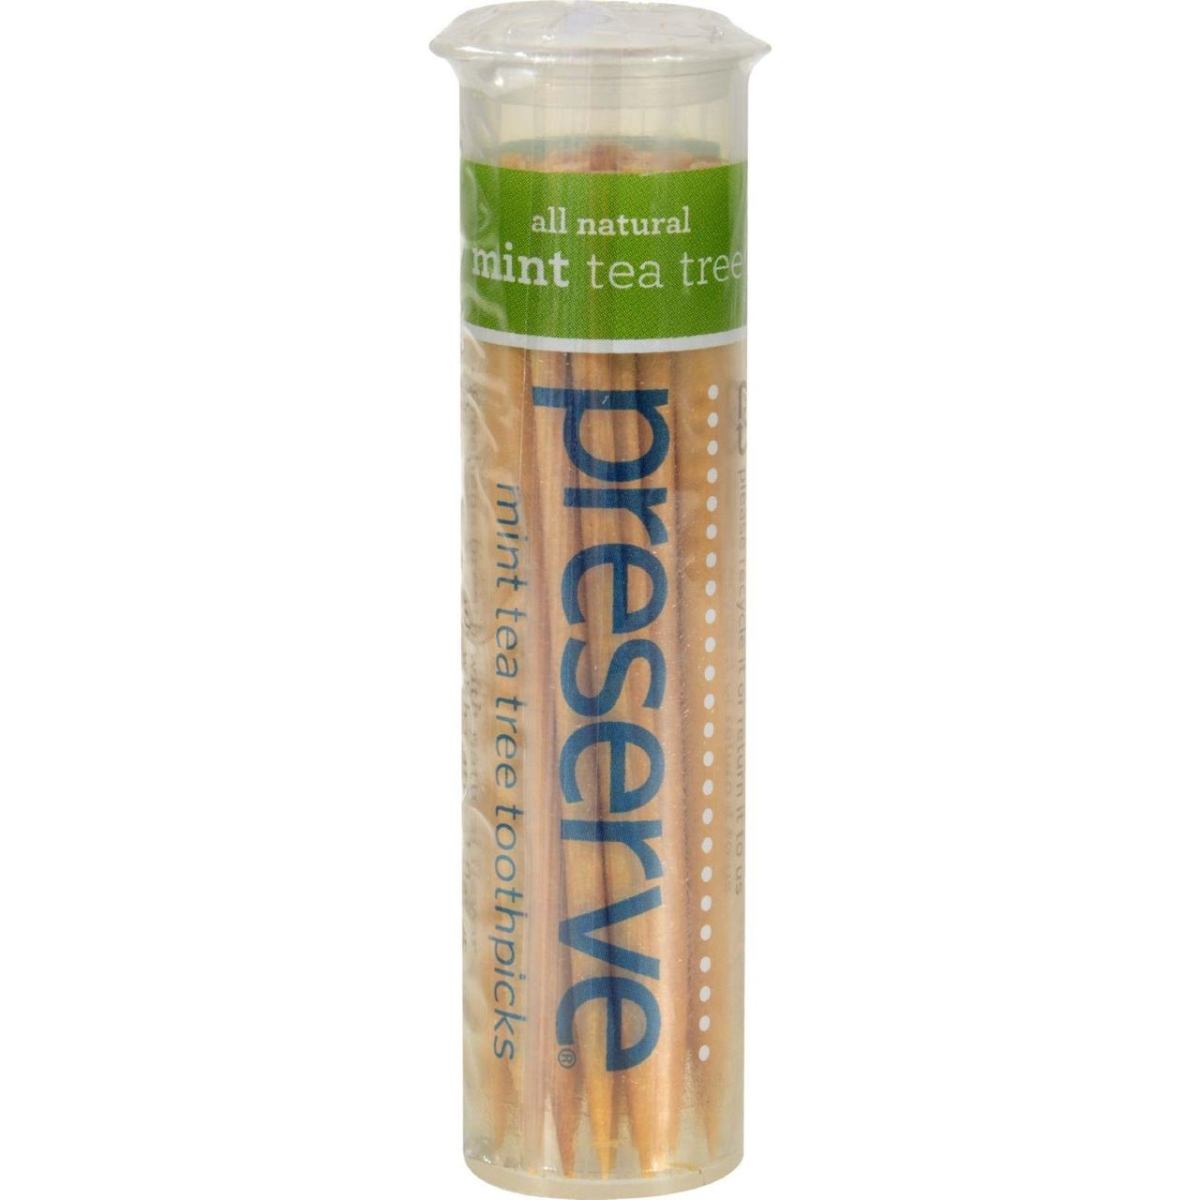 Hg0725762 Mint Tea Tree Flavored Toothpicks - 35 Pieces, Case Of 24